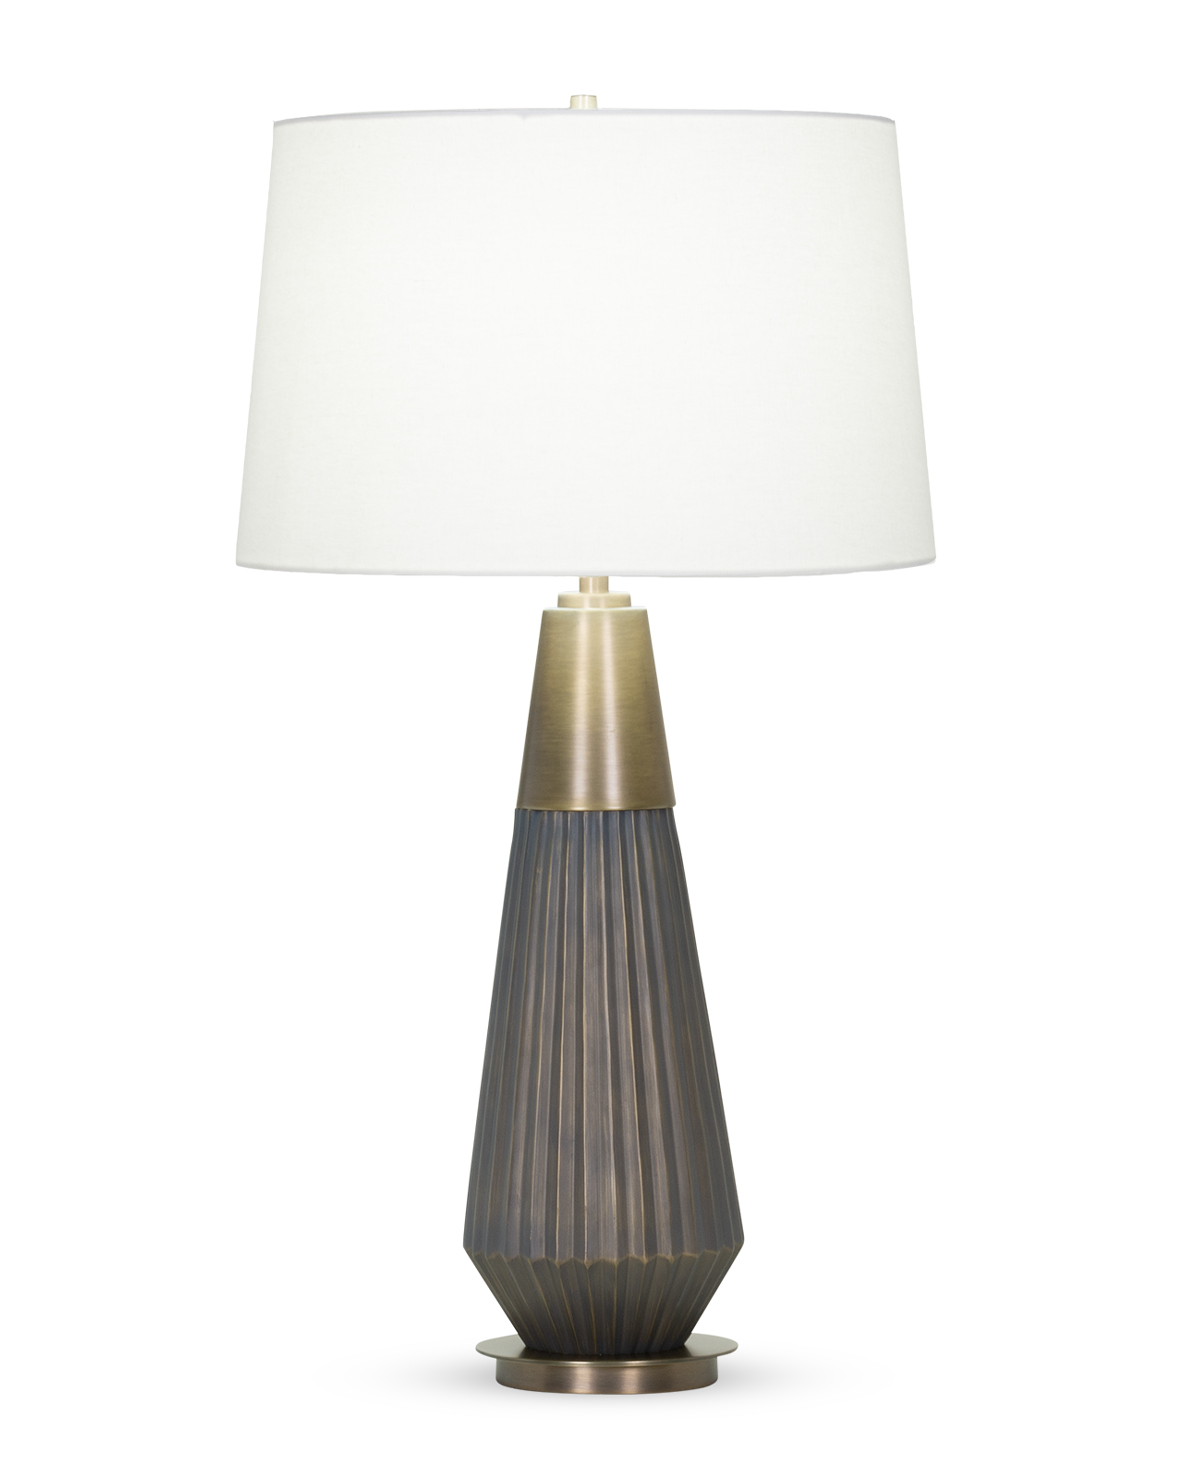 FlowDecor Helena Table Lamp in resin with bronze with brass highlights and metal with antique brass finish and off-white linen tapered drum shade (# 4404)